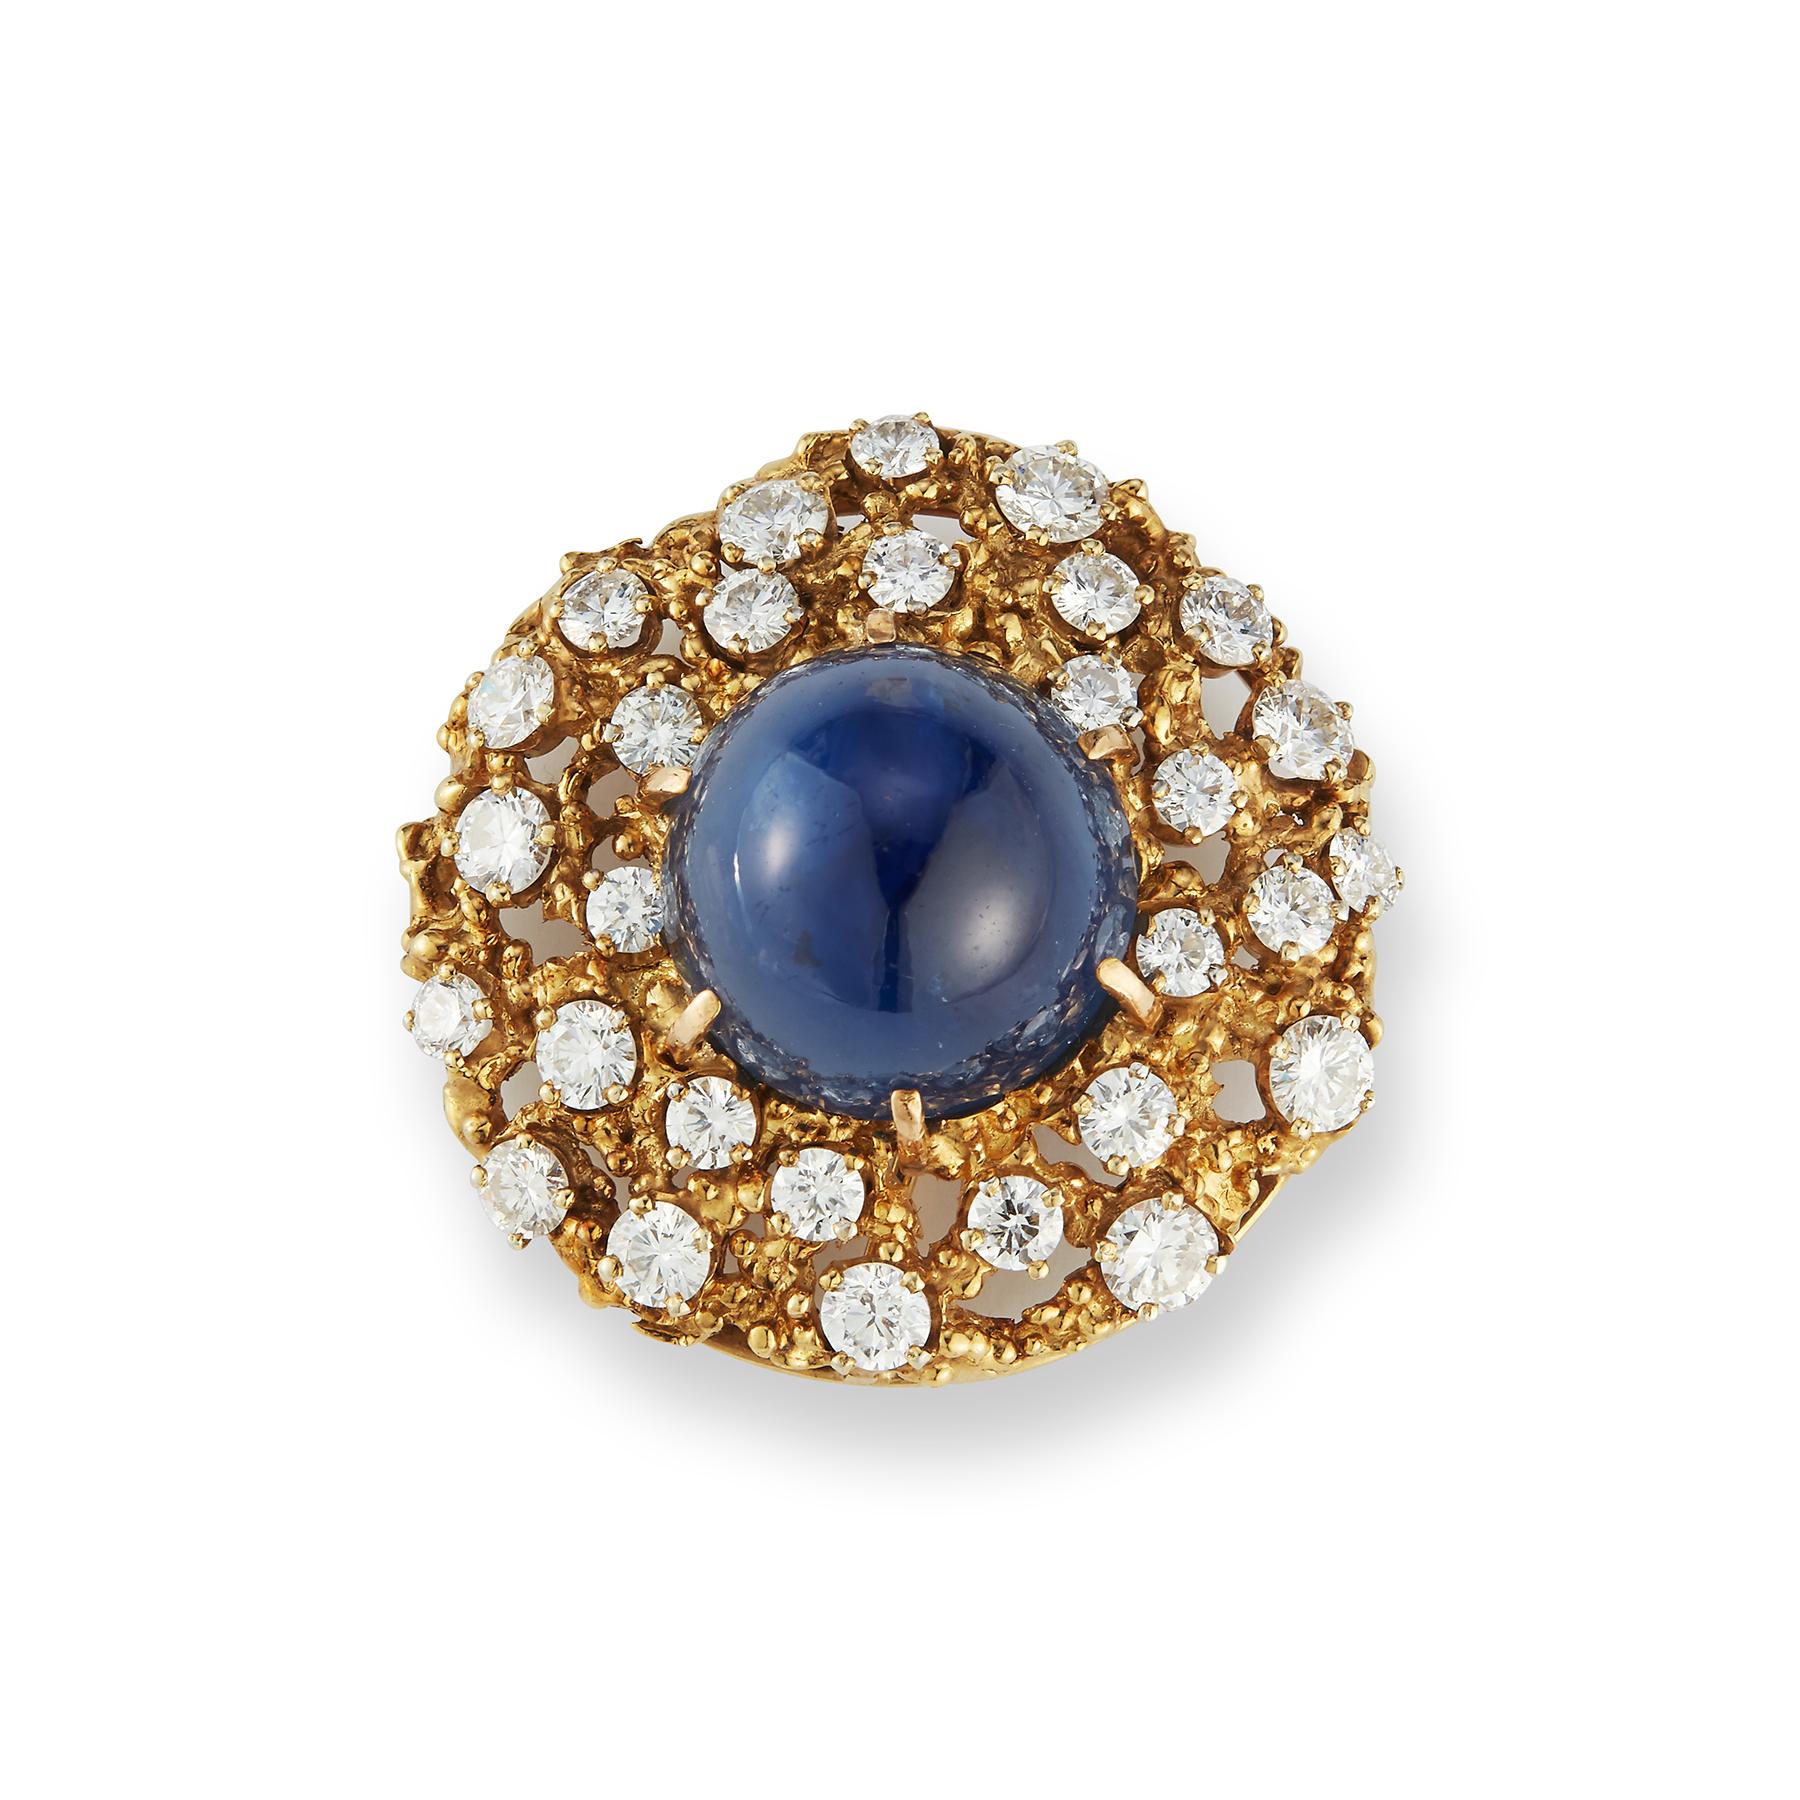 48.24 Certified Natural Sapphire Brooch by Ruser

1 cabochon sapphire weighing 48.24 carats certified as natural by AGL laboratories and of Ceylown origin, surrounded by  29 round cut diamonds set in Platinum & 18K gold 

Measurements: 1.5